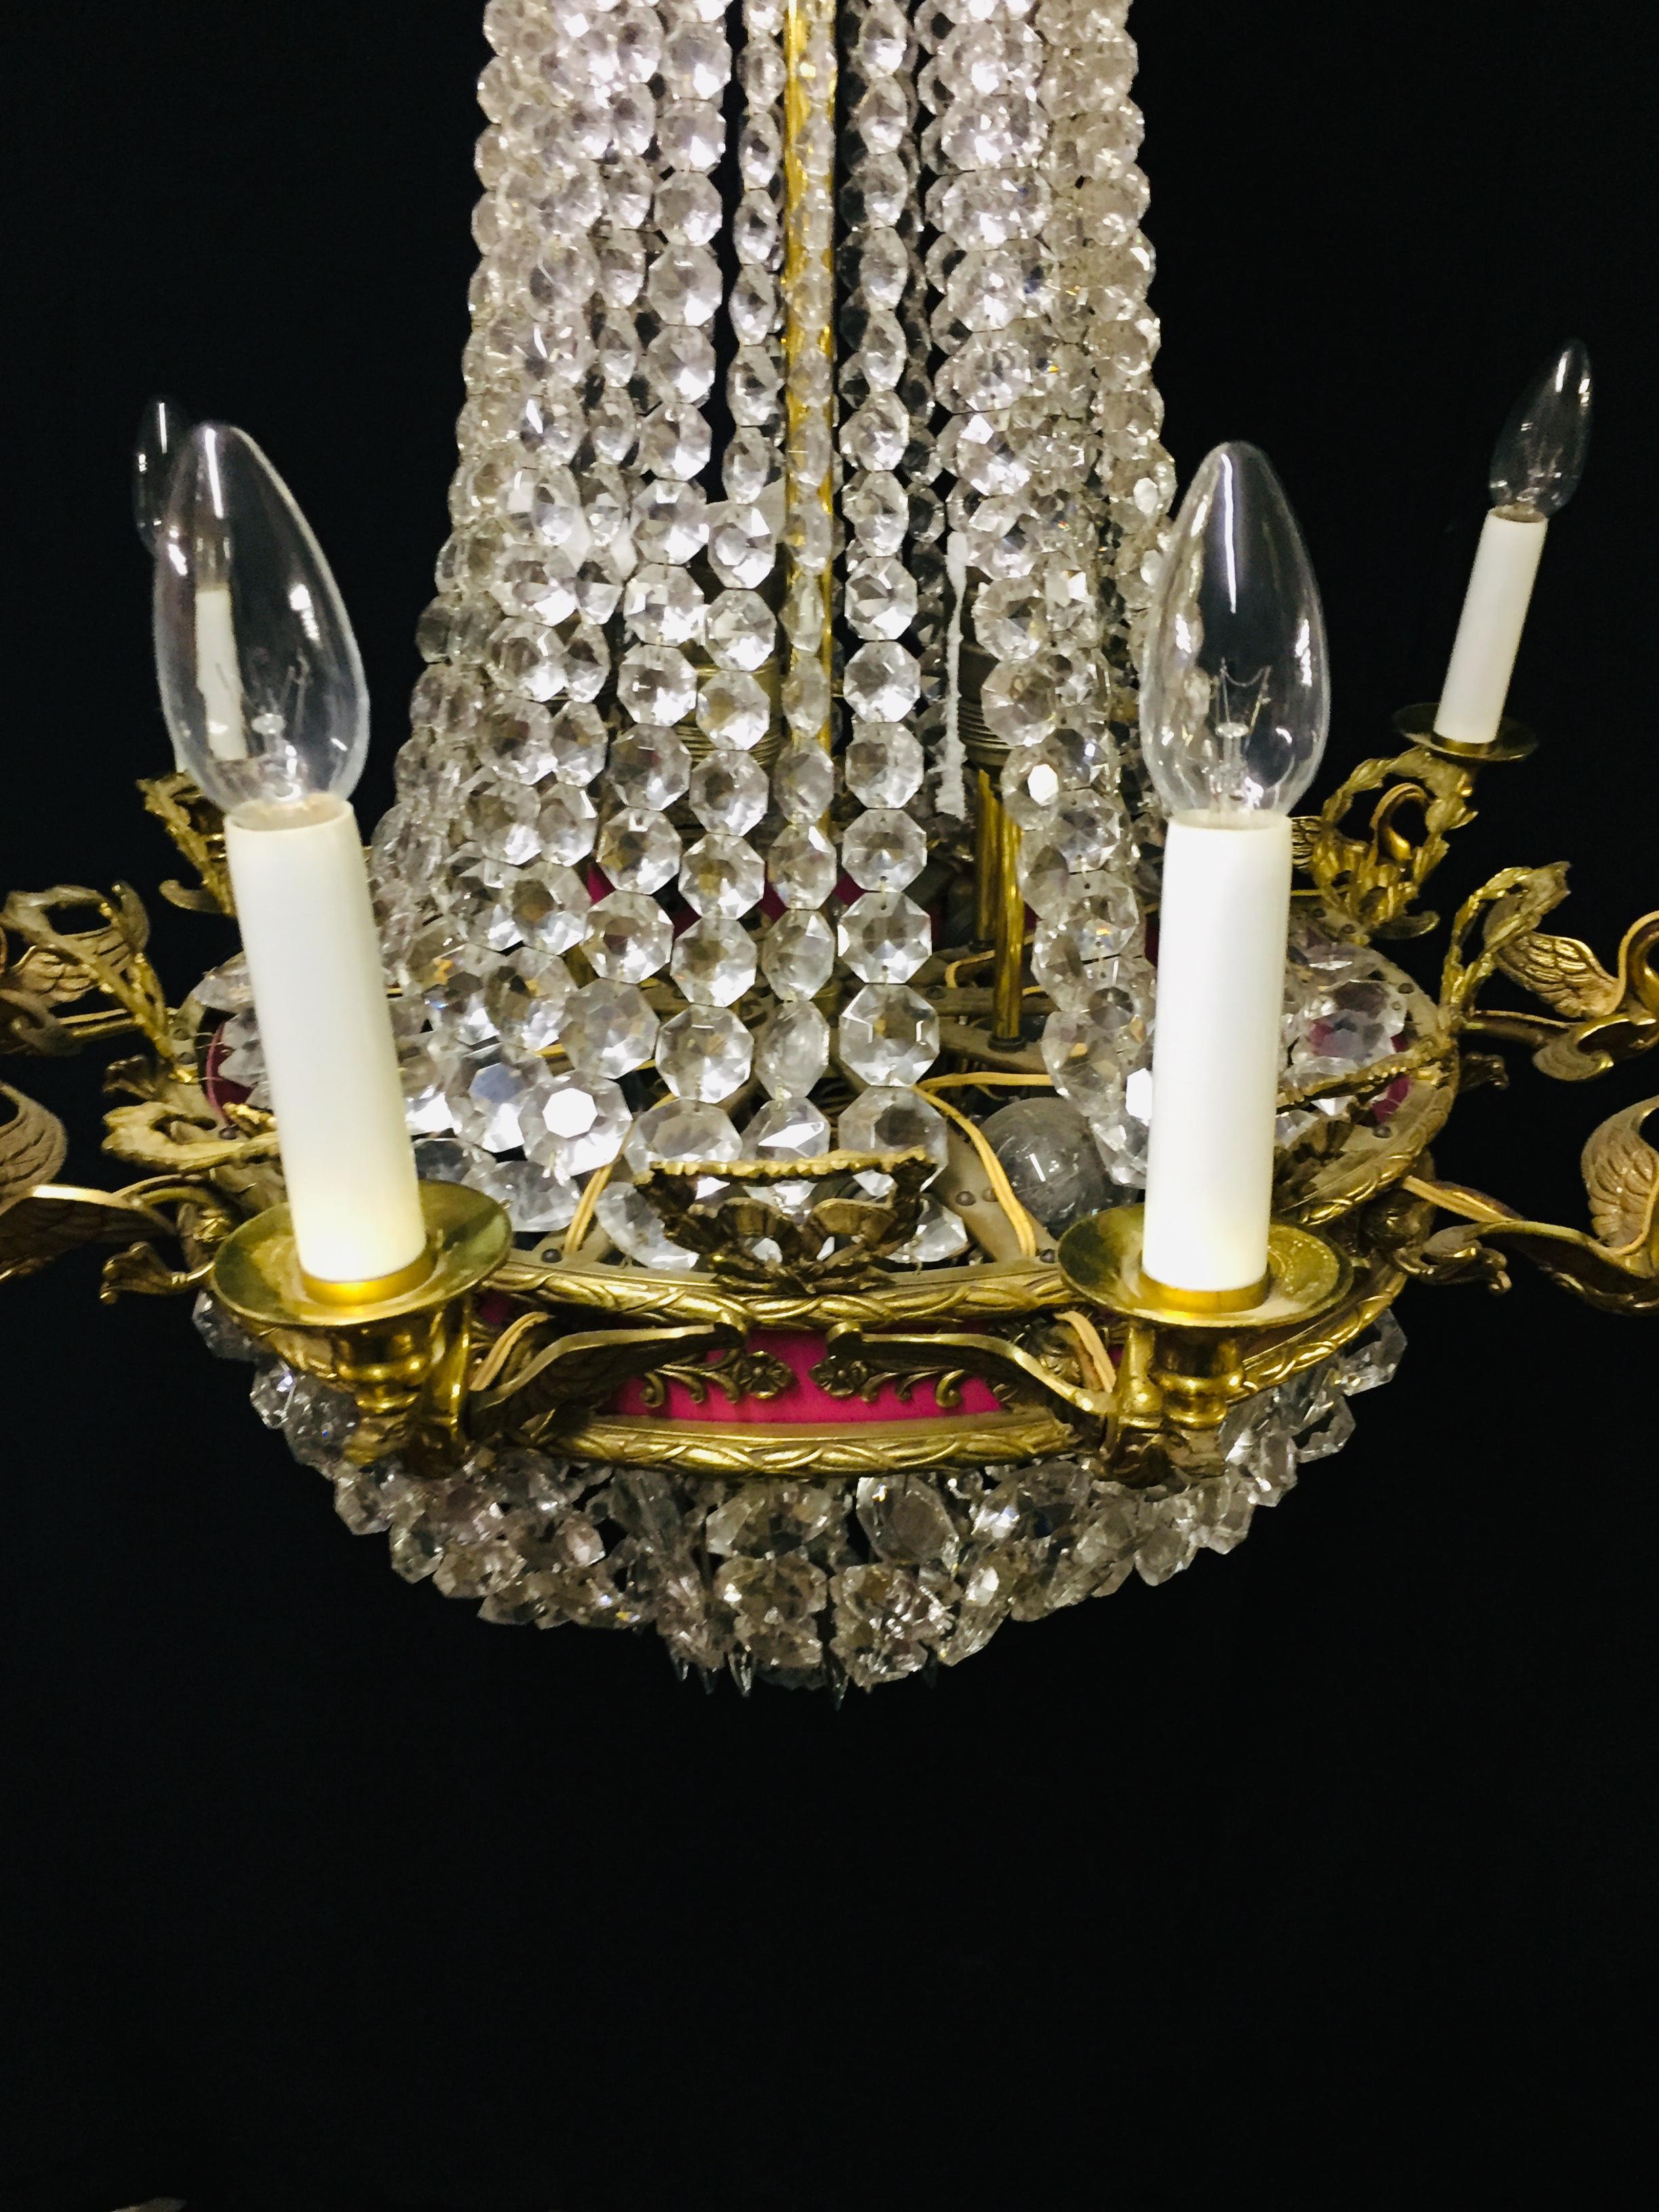 Gilt Empire French Chandelier with 10 Swans Arms